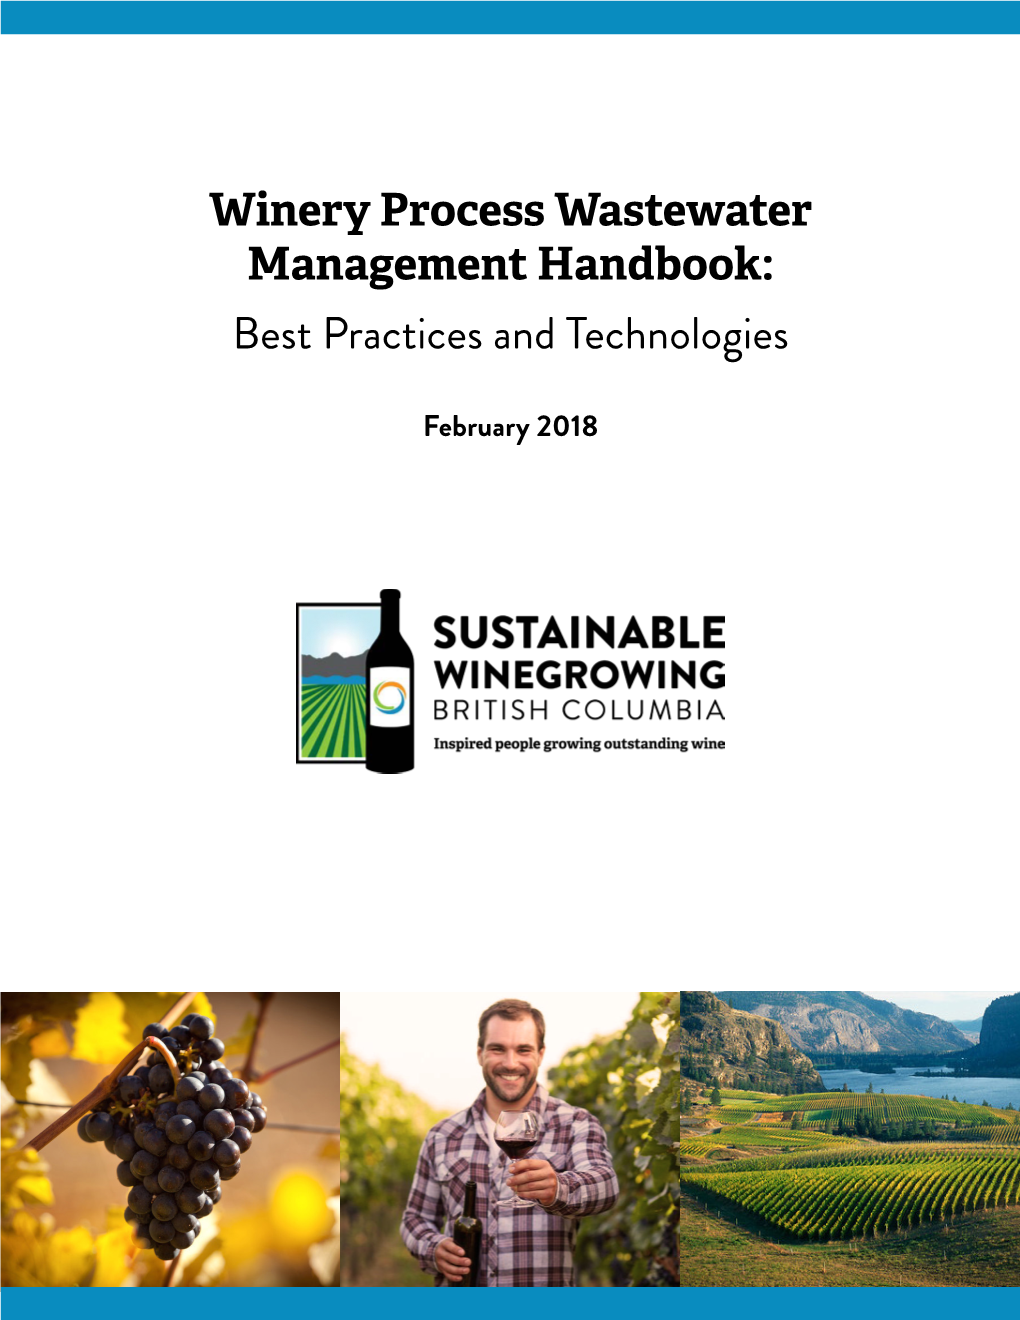 Winery Process Wastewater Management Handbook: Best Practices and Technologies